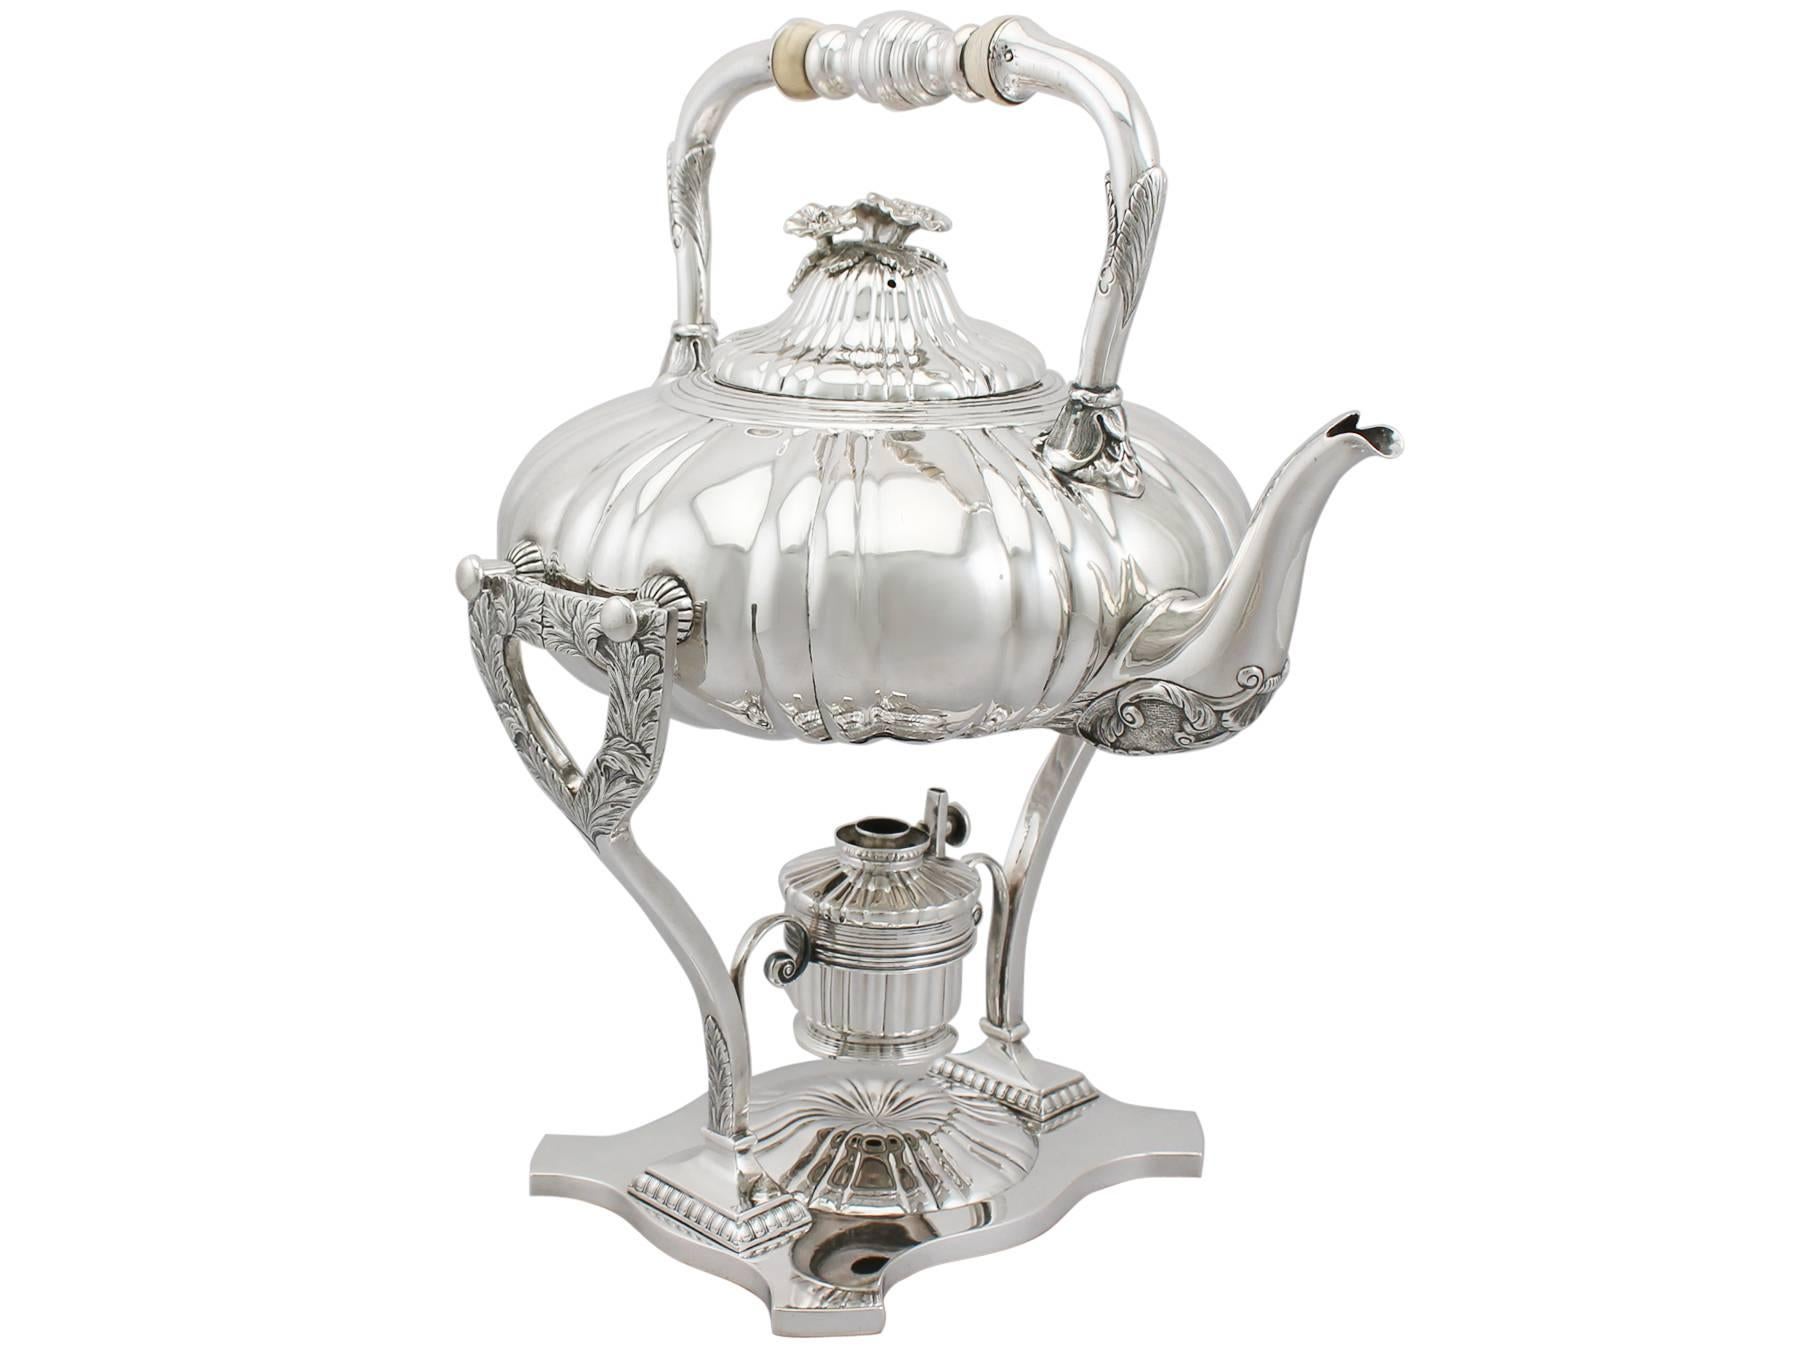 An exceptional, fine and impressive antique German silver spirit kettle; an addition to our antique silver teaware collection.

This exceptional antique German standard silver spirit kettle has a circular compressed melon shaped form.

The surface